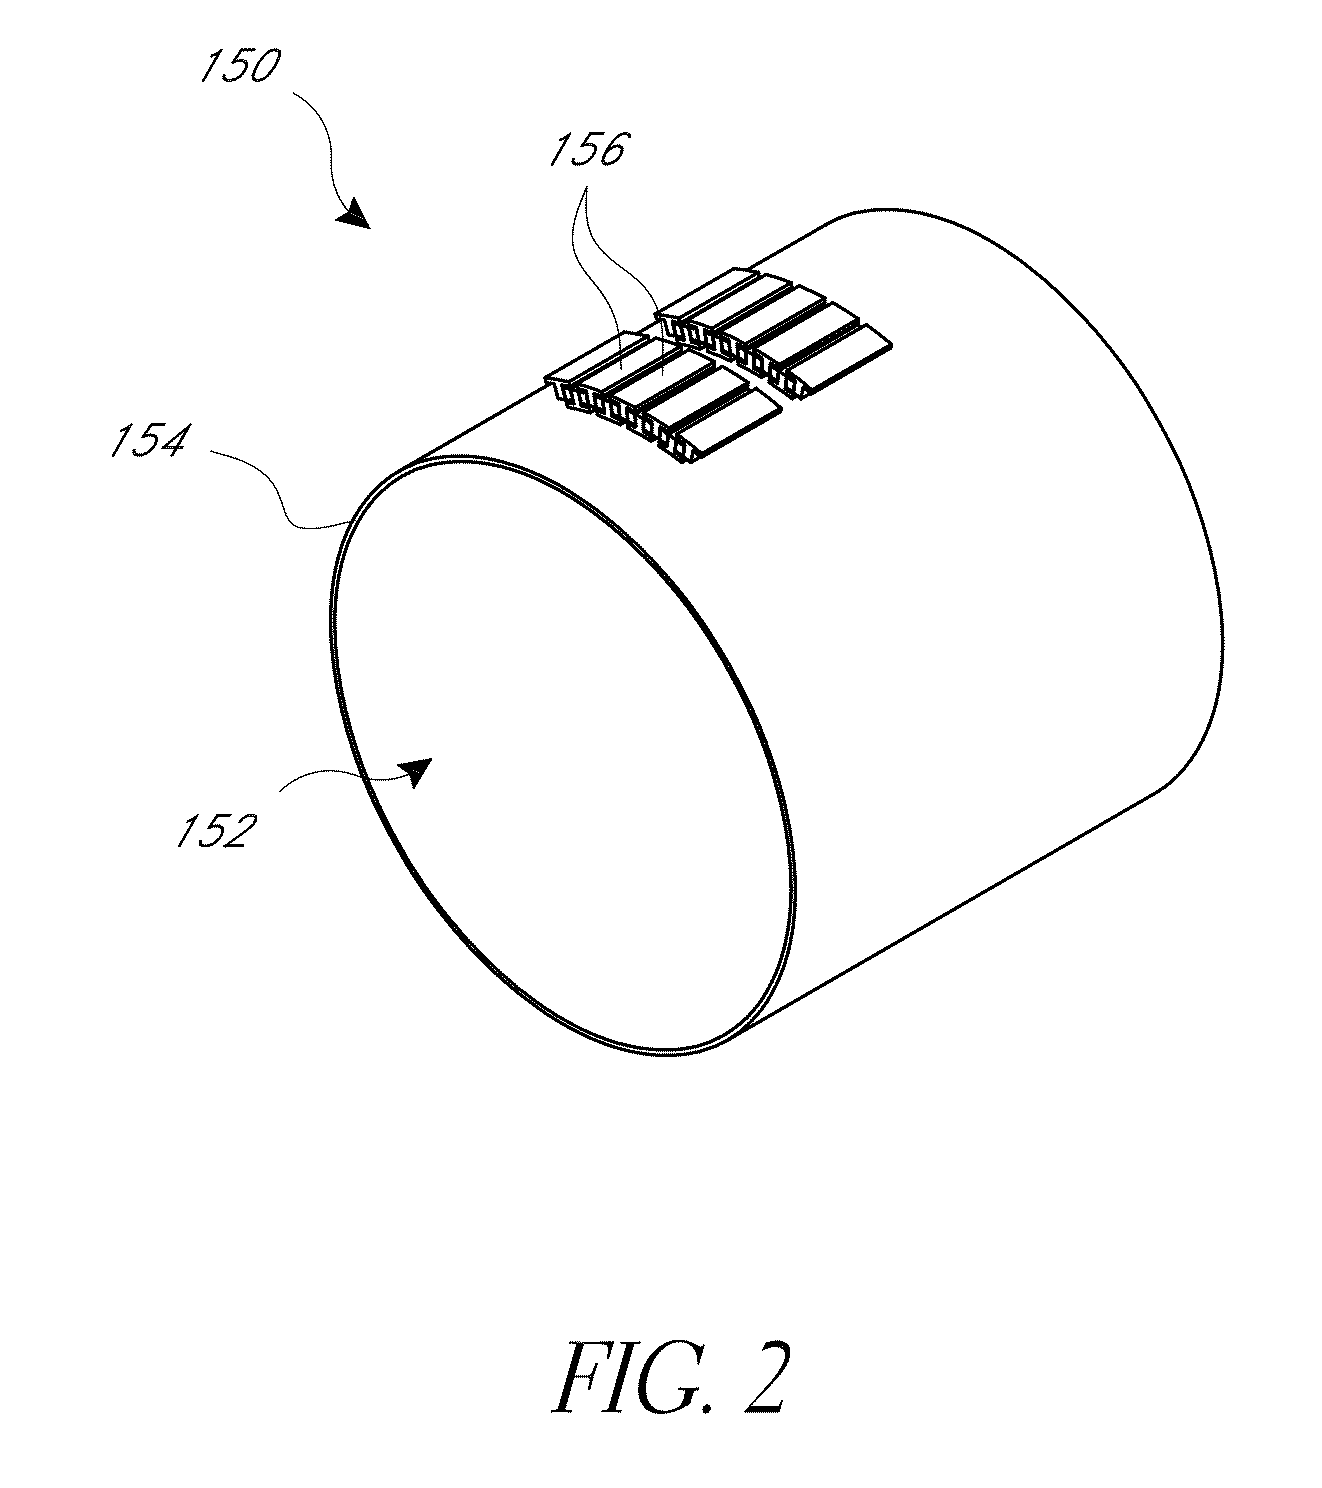 Thermoelectric-based power generation systems and methods